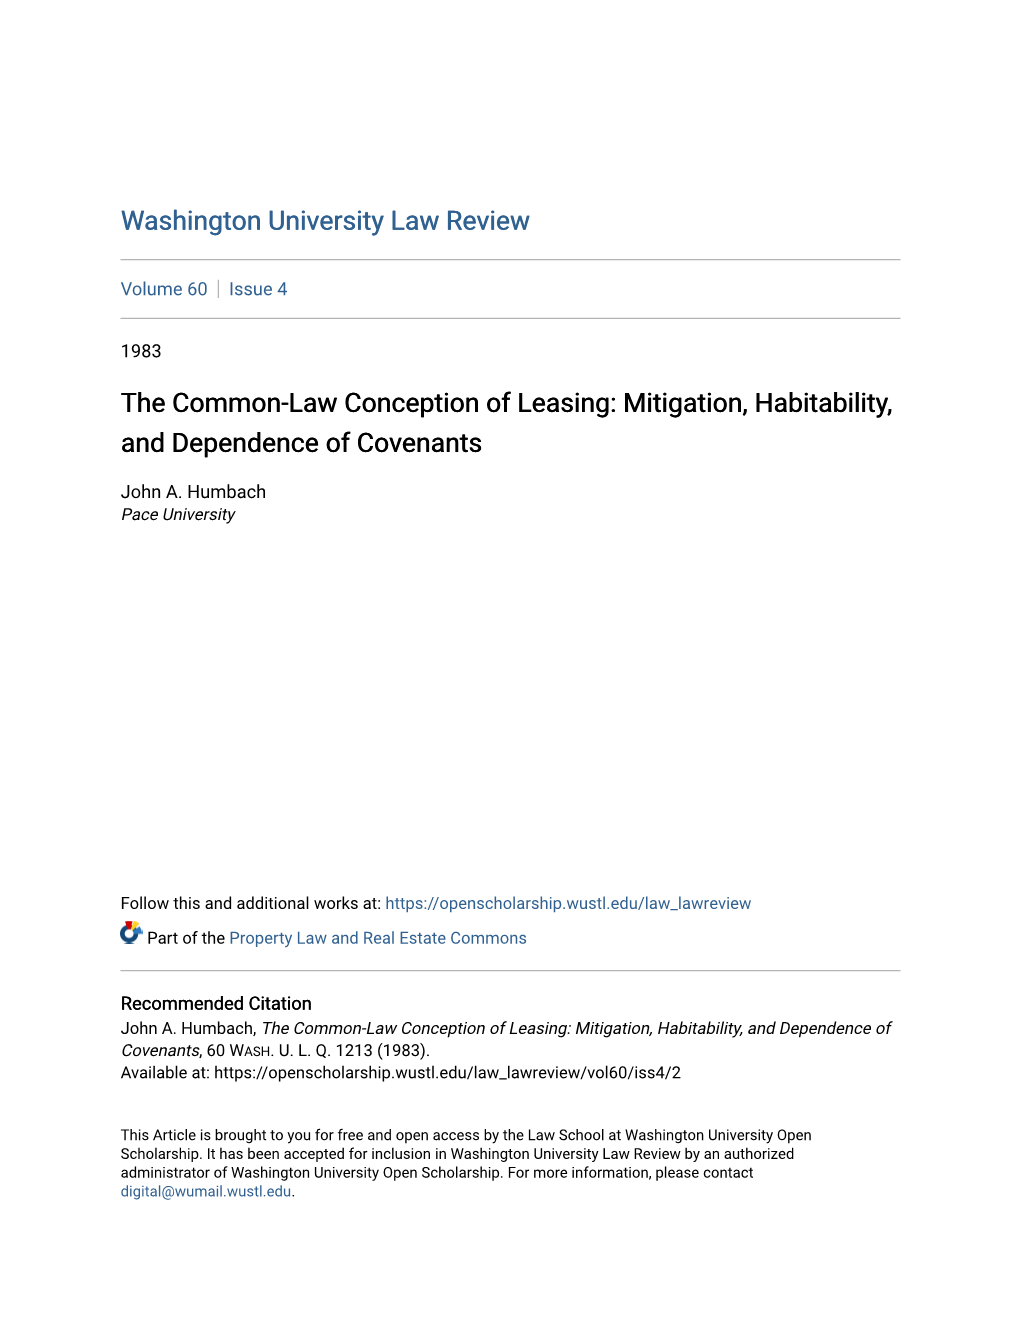 The Common-Law Conception of Leasing: Mitigation, Habitability, and Dependence of Covenants